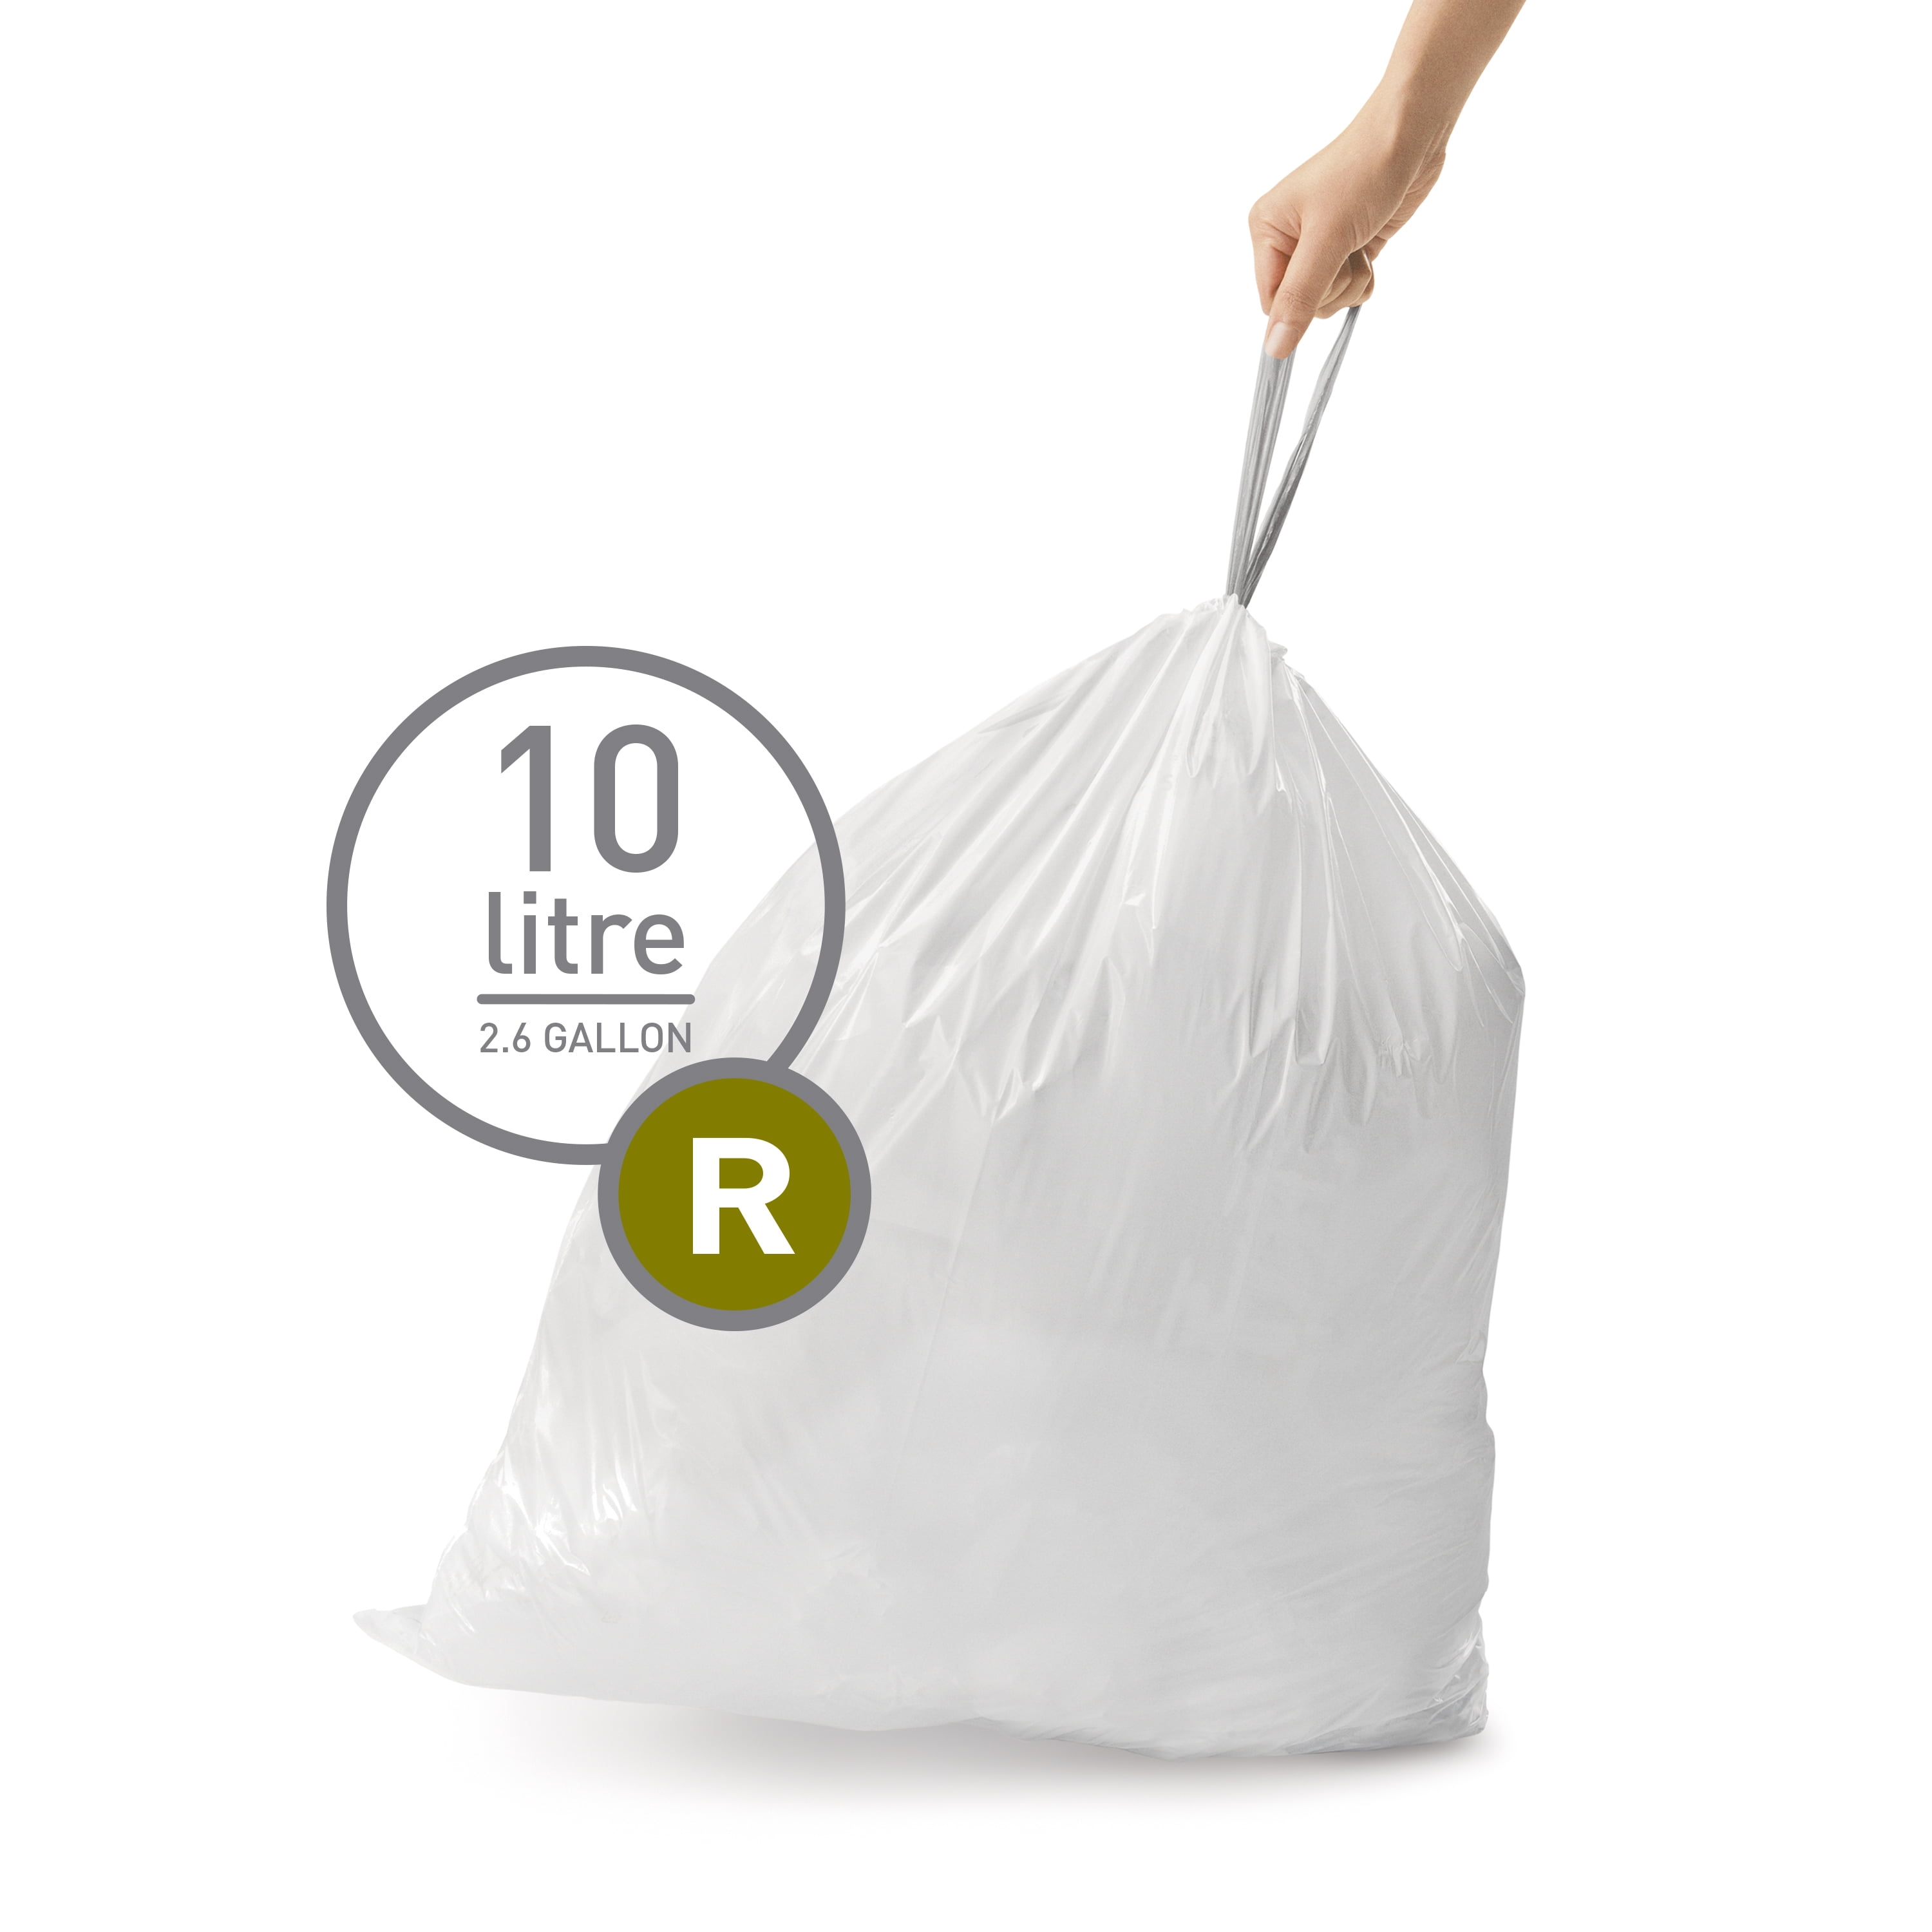 Details about   simplehuman Code R Custom Fit Drawstring Trash Bags 10 Liter/2.6 Gallon 60 Count 